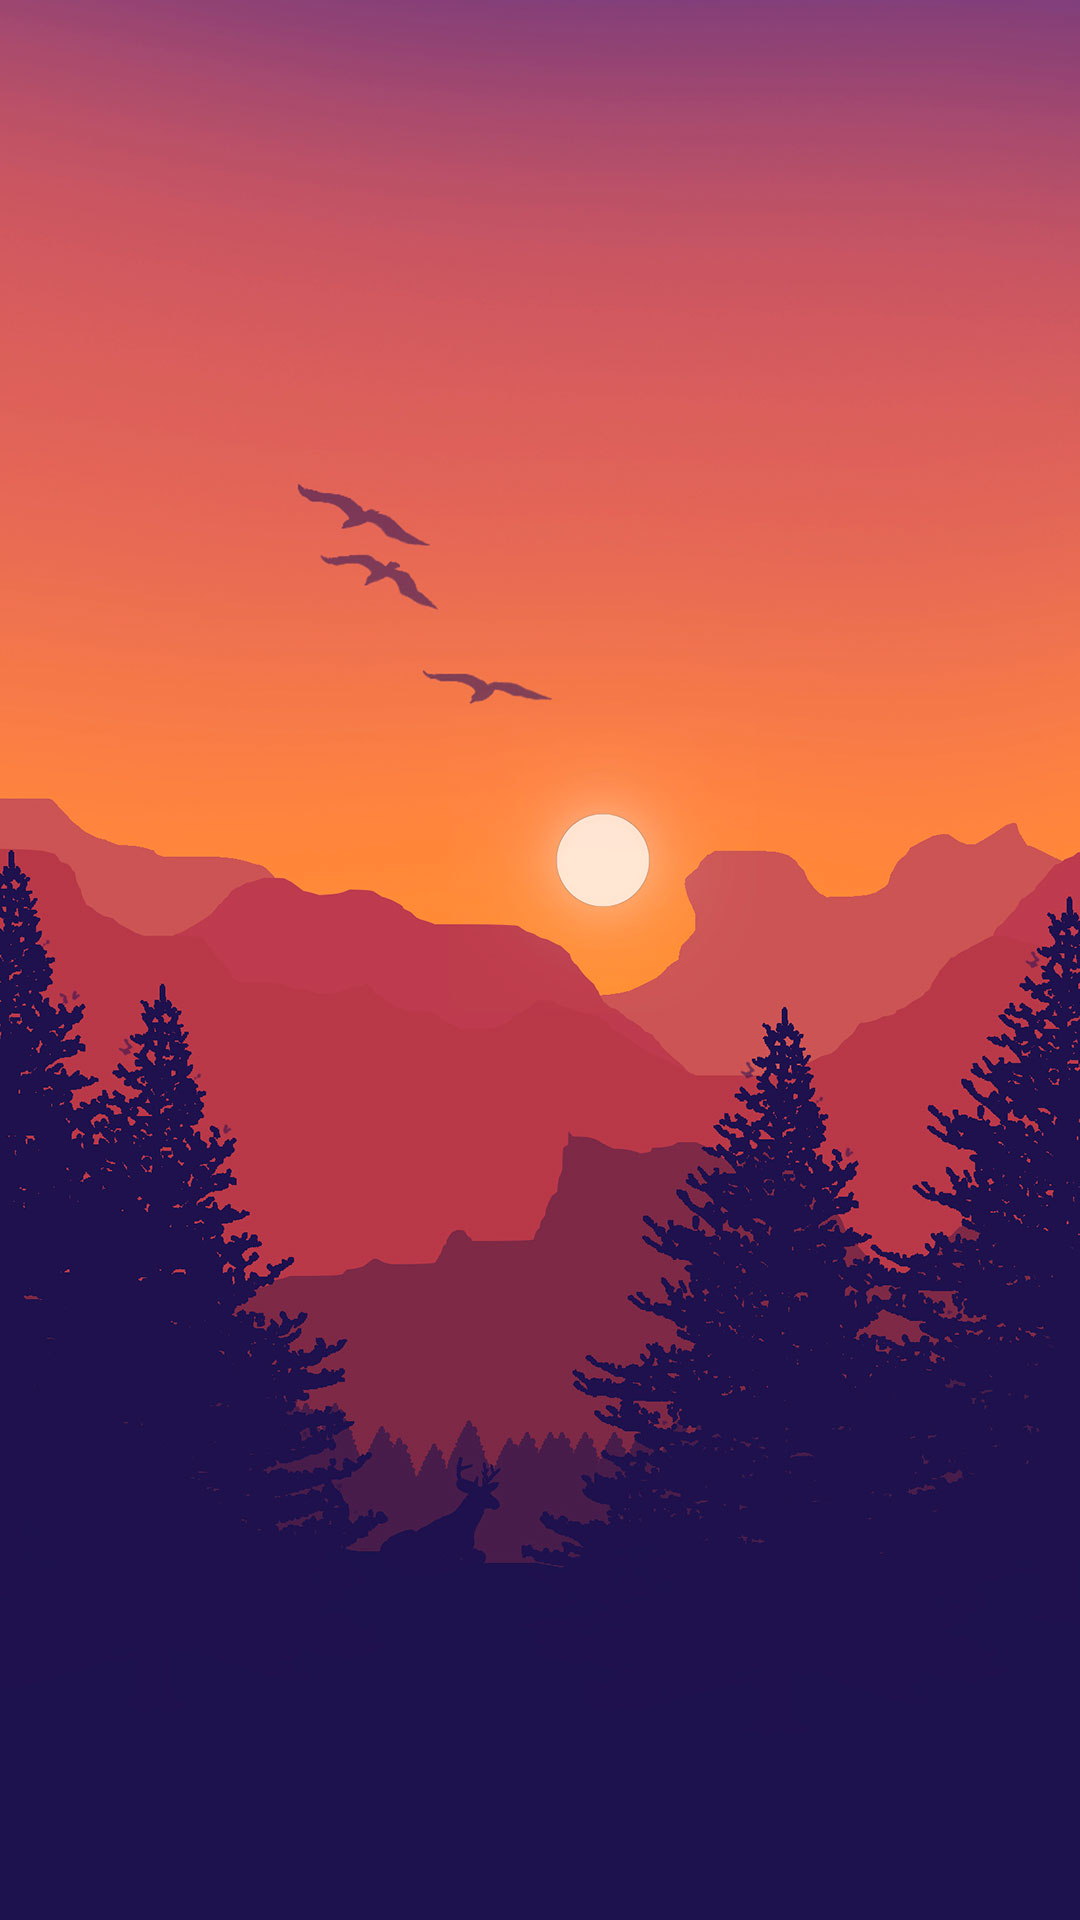 drawing wallpaper,sky,nature,red sky at morning,sunrise,red